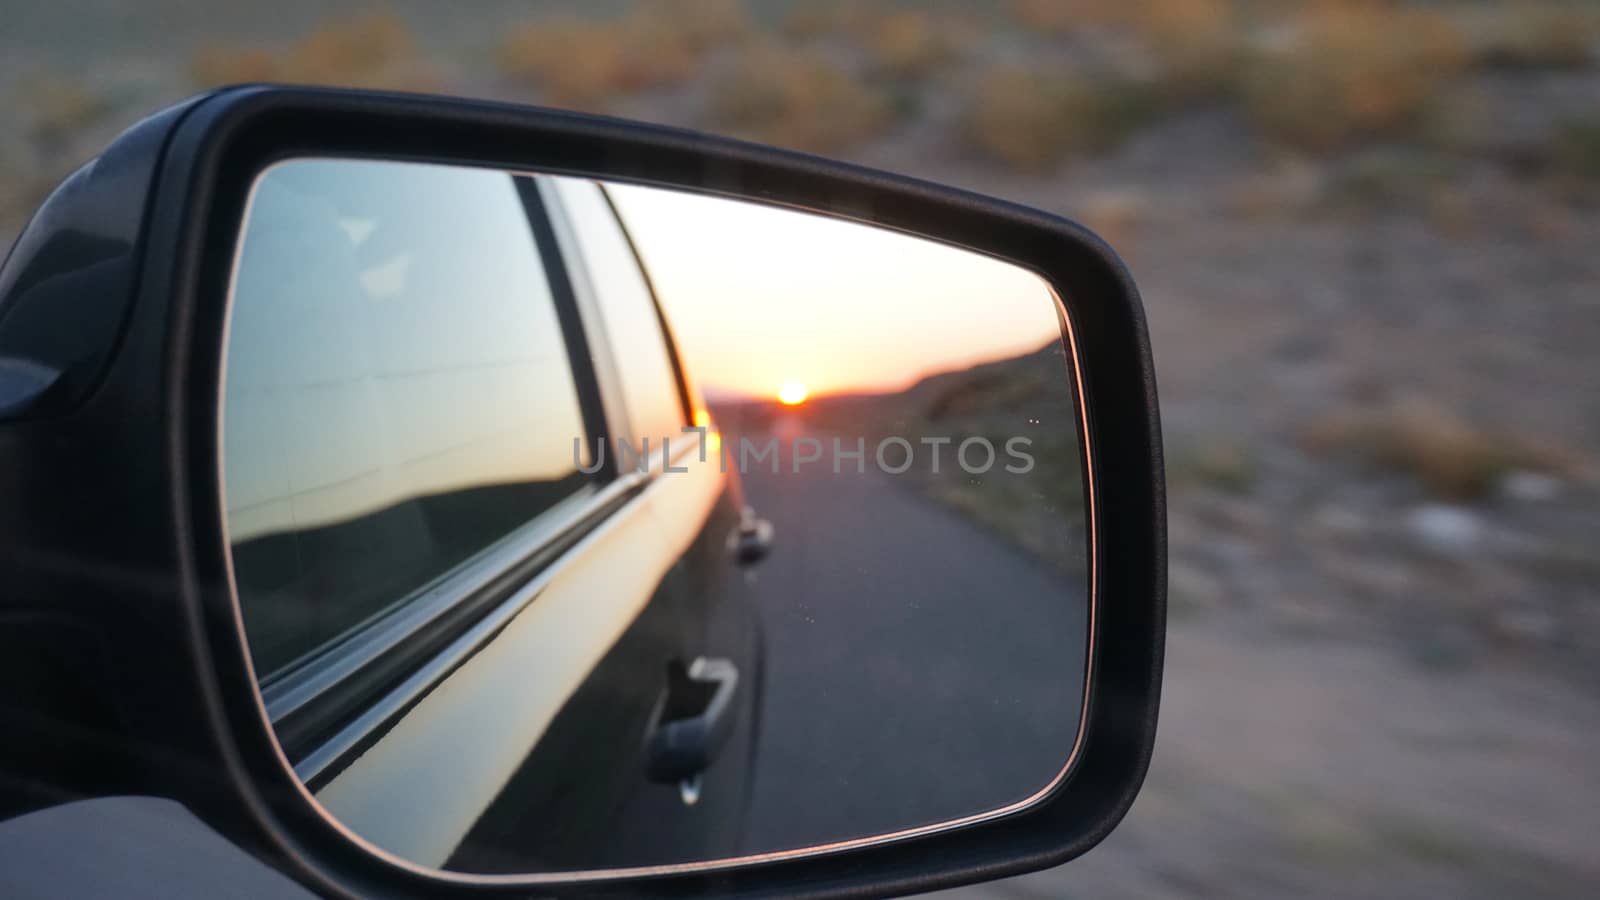 View in the side mirror of the car. by Passcal